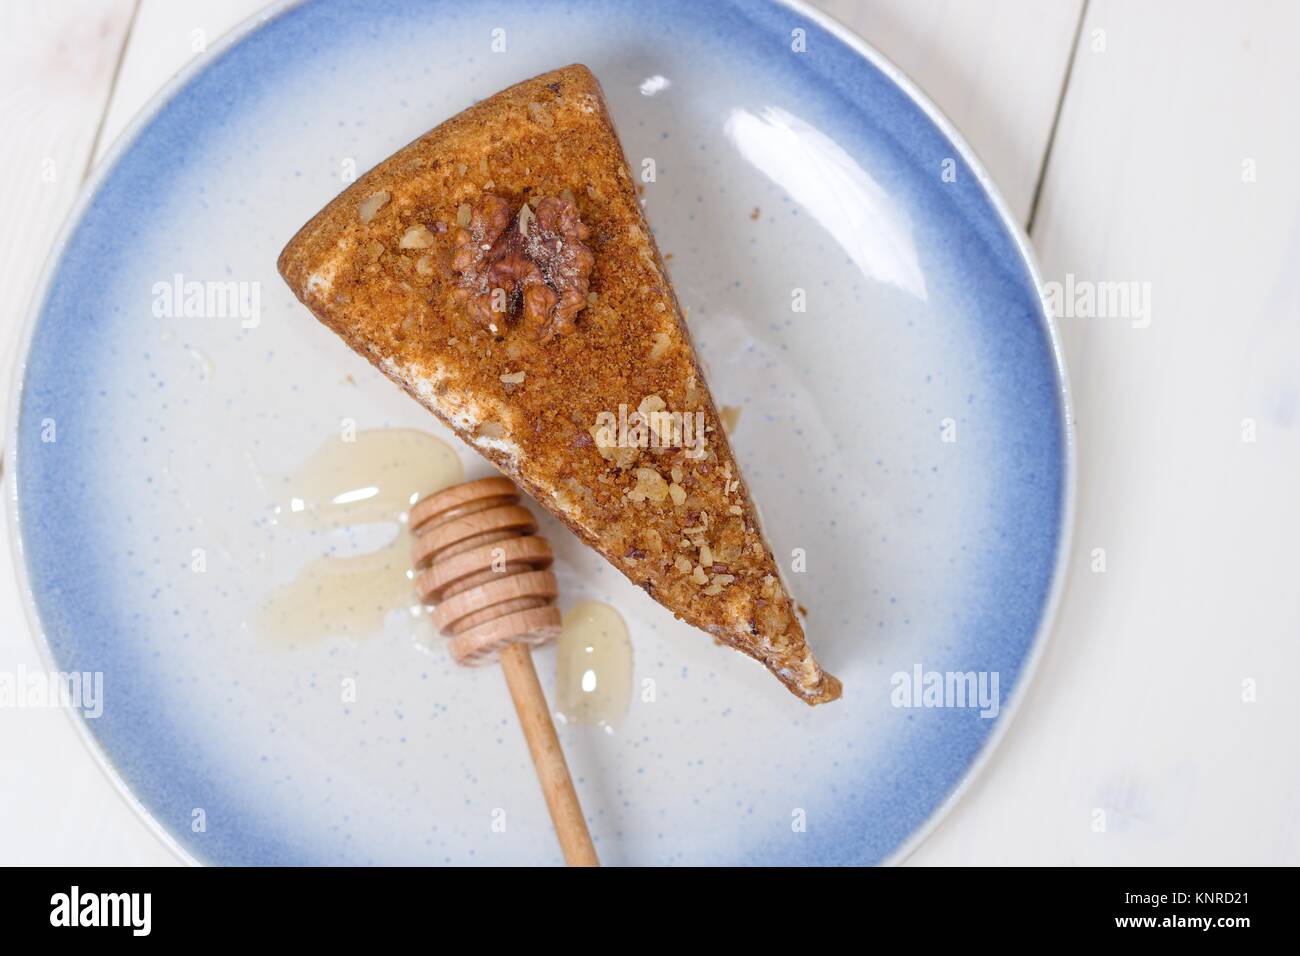 Top down view on traditional "medovik", or layered honey cake Stock Photo